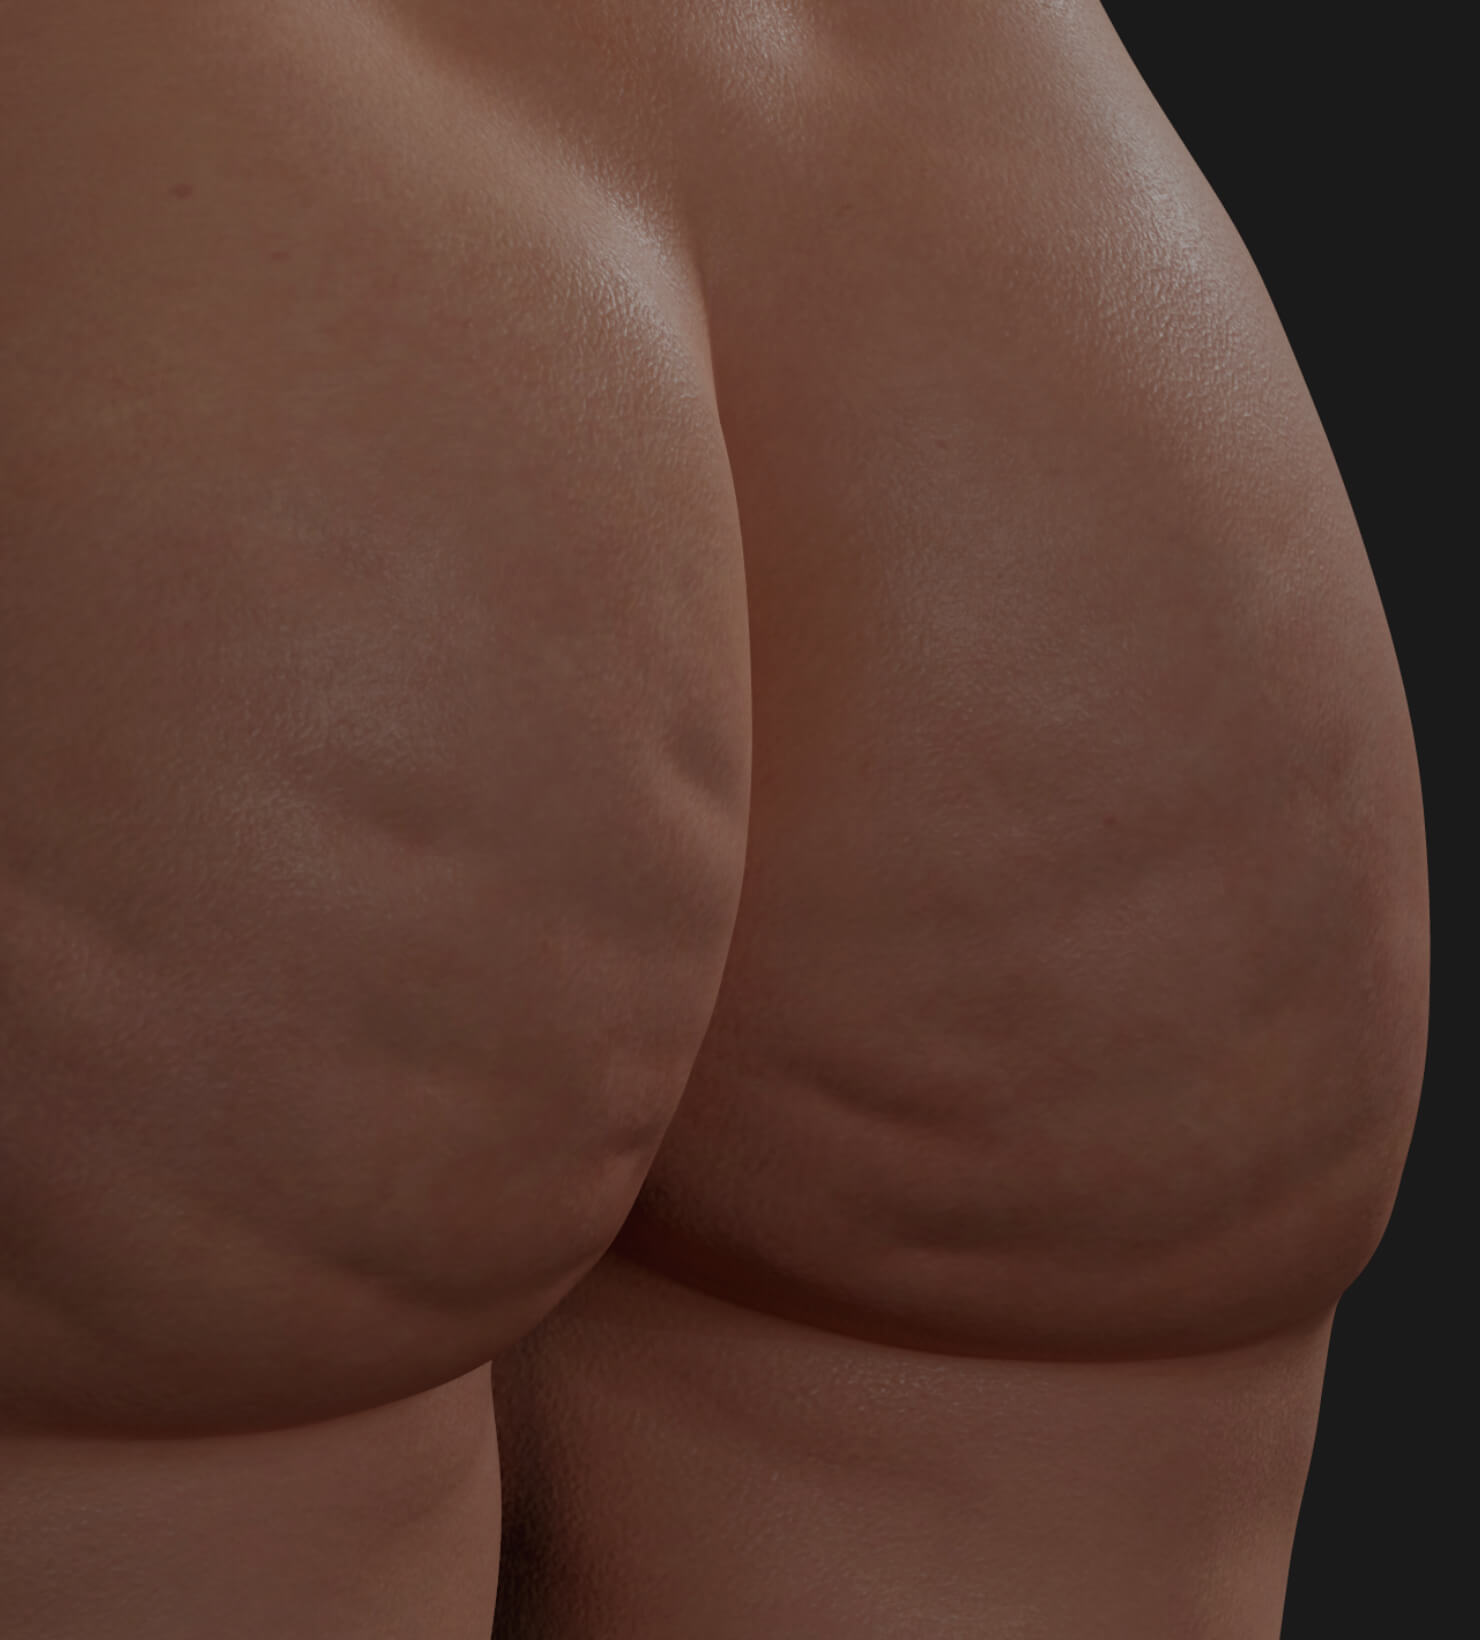 Buttocks of a Clinique Chloé female patient showing cellulite to be treated with Sculptra injections for cellulite reduction